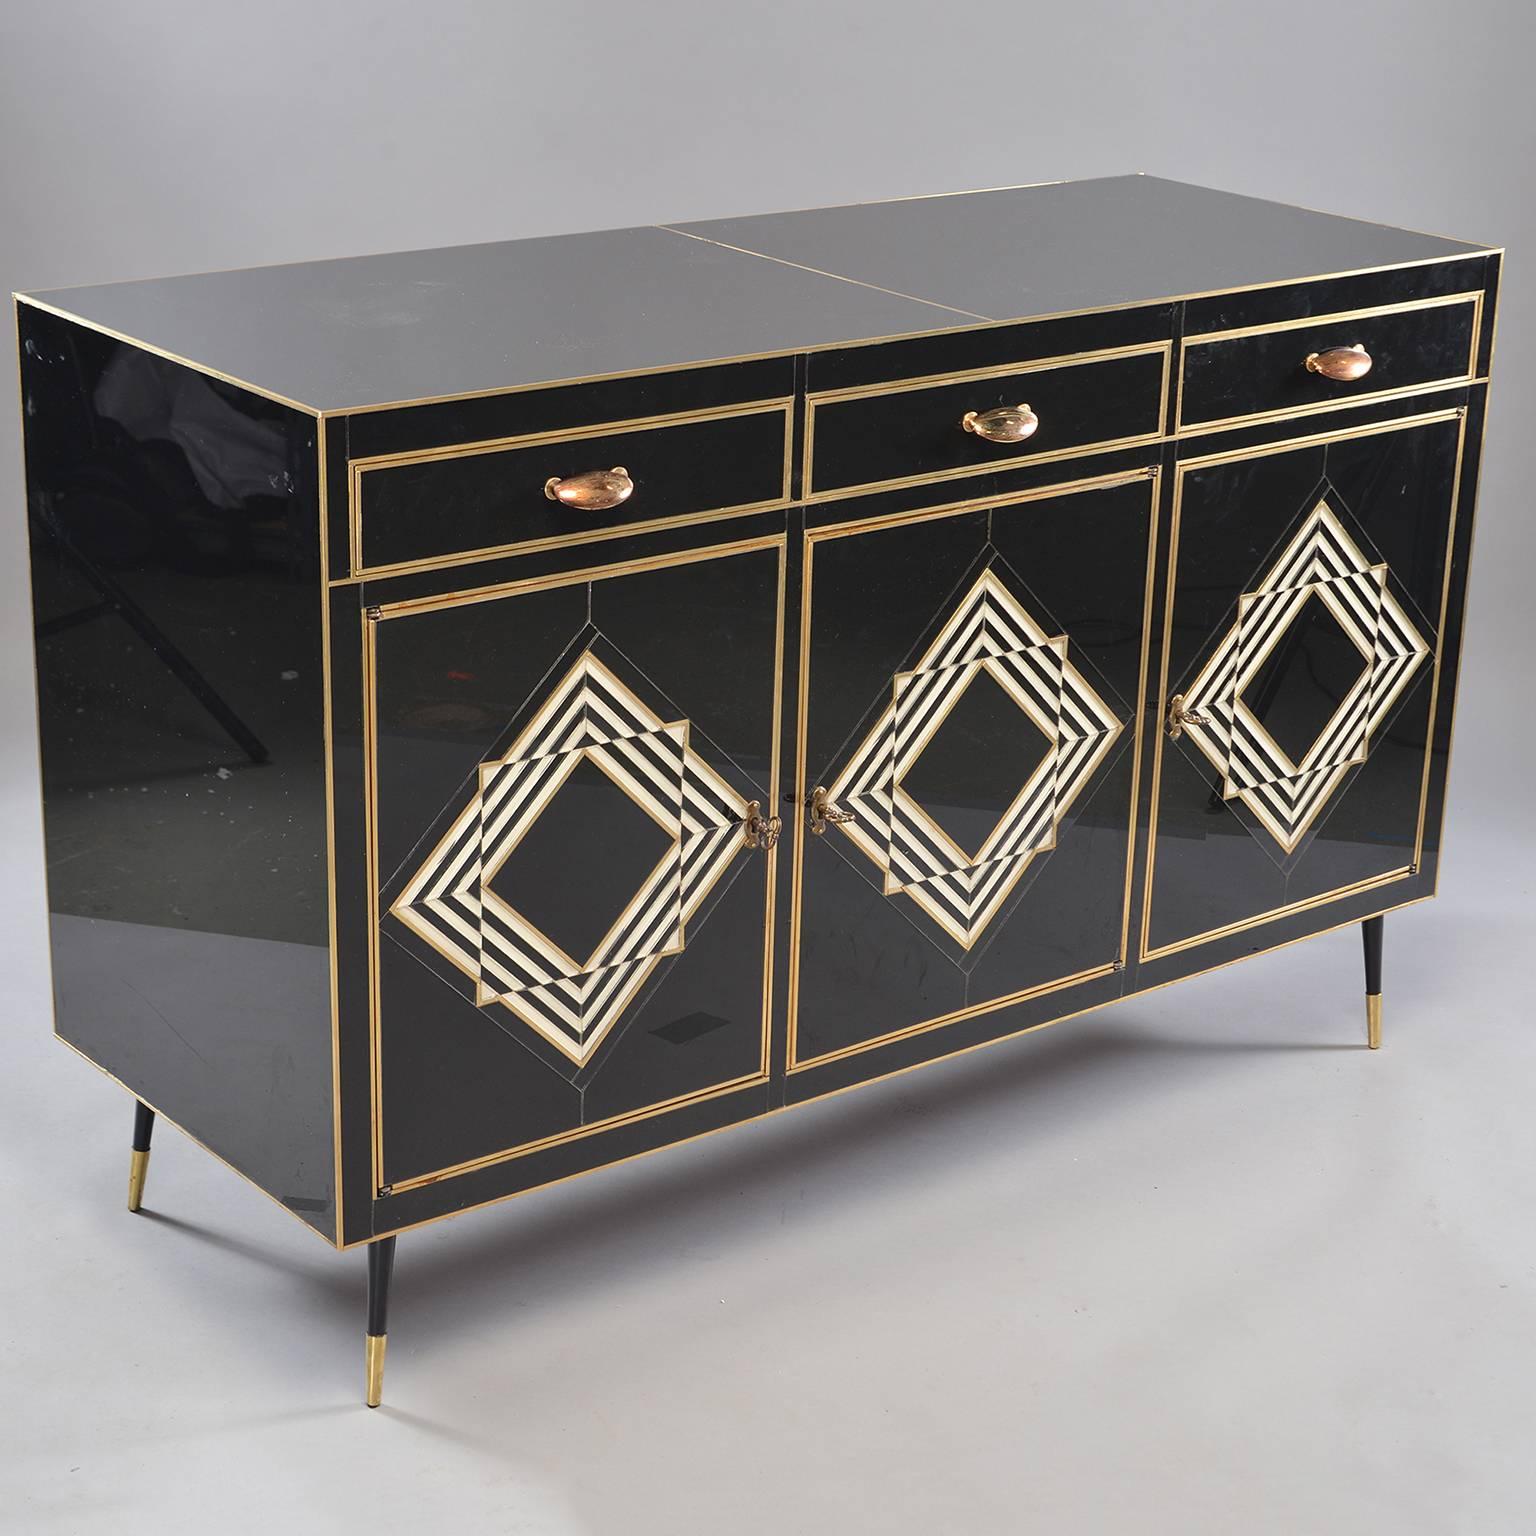 Italian glass clad credenza, sideboard or buffet cabinet, circa 1960s. Underlying cabinet structure is wood and piece is entirely covered (with exception of back and legs) in black and cream colored Murano glass with brass accents. Cabinet consists